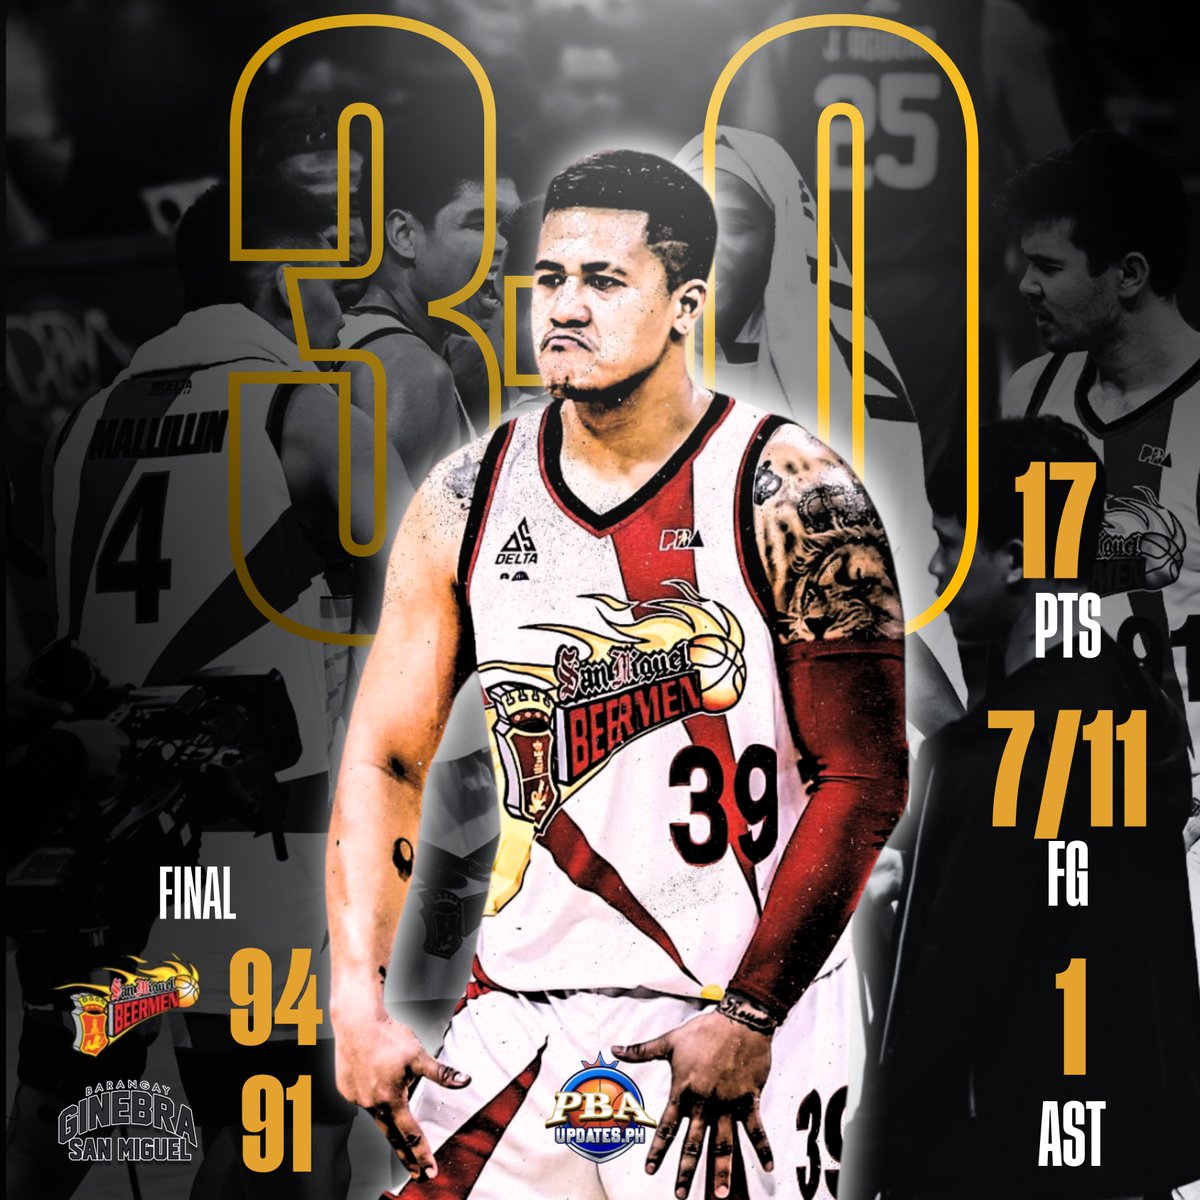 𝗦𝗠𝗕 44𝘁𝗵 𝘁𝗶𝗺𝗲 𝗙𝗶𝗻𝗮𝗹 𝗕𝗼𝘂𝗻𝗱!

Jericho Cruz helps the team with 17 Points, 7/11 FG, and 1 Assist to win vs Gin Kings!

Read more: pbaupdates.ph/news/smb-sweep…

Add extra excitement to your PBA? Register now: bit.ly/3Rv90ga

#PBASemis #PBA #SMB #ginebra